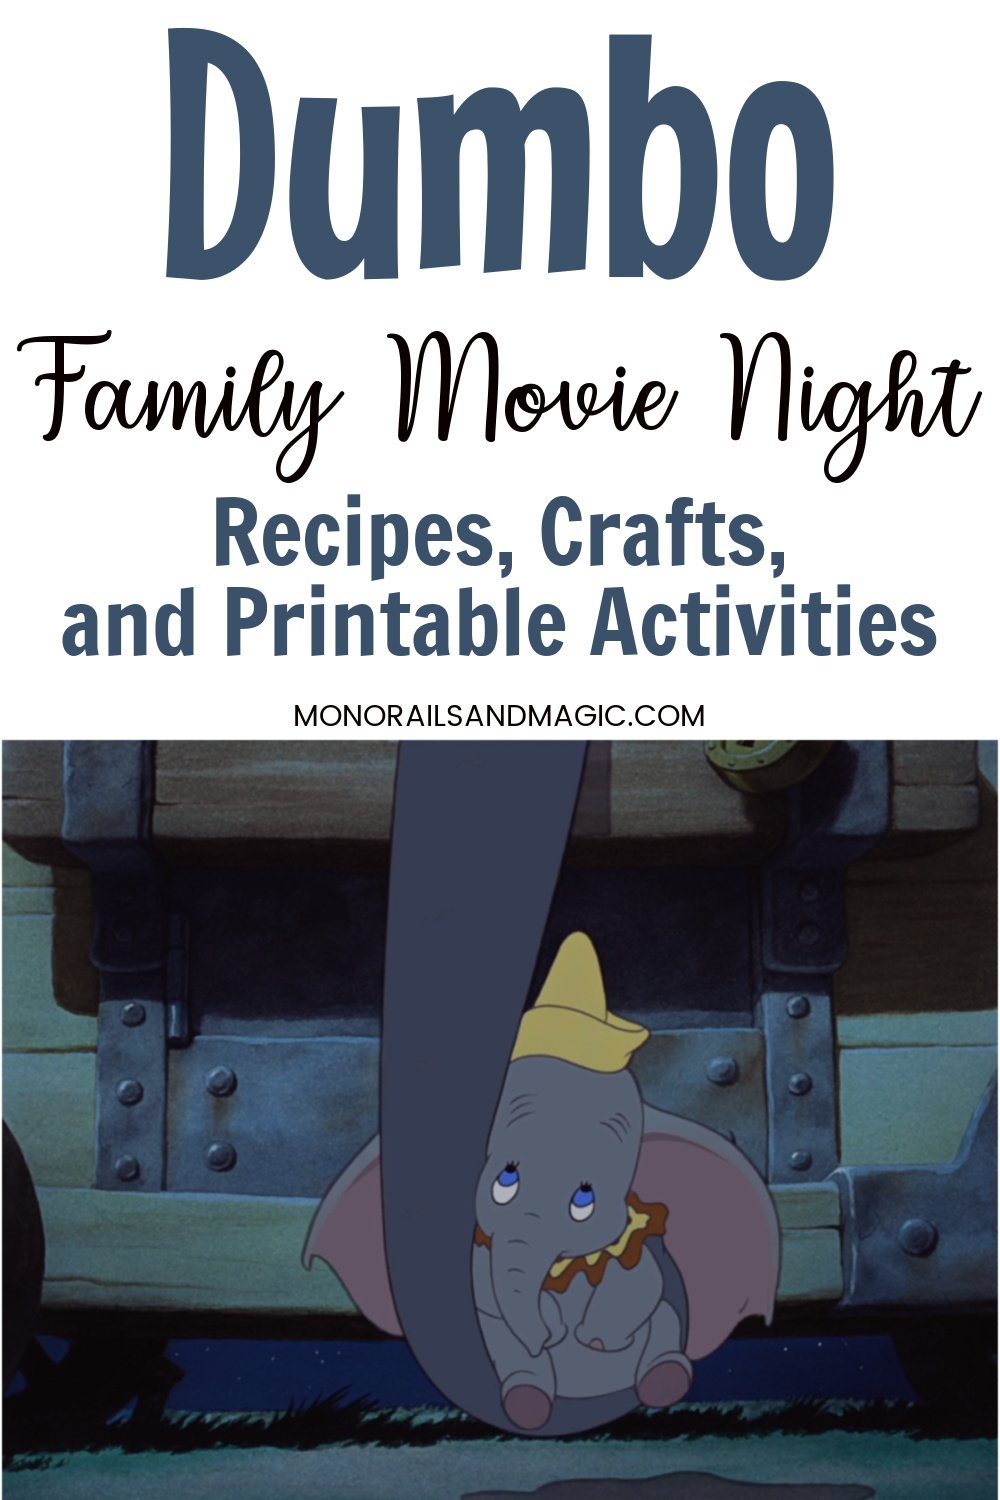 Recipes, crafts, and printable activities for a Dumbo family movie night.